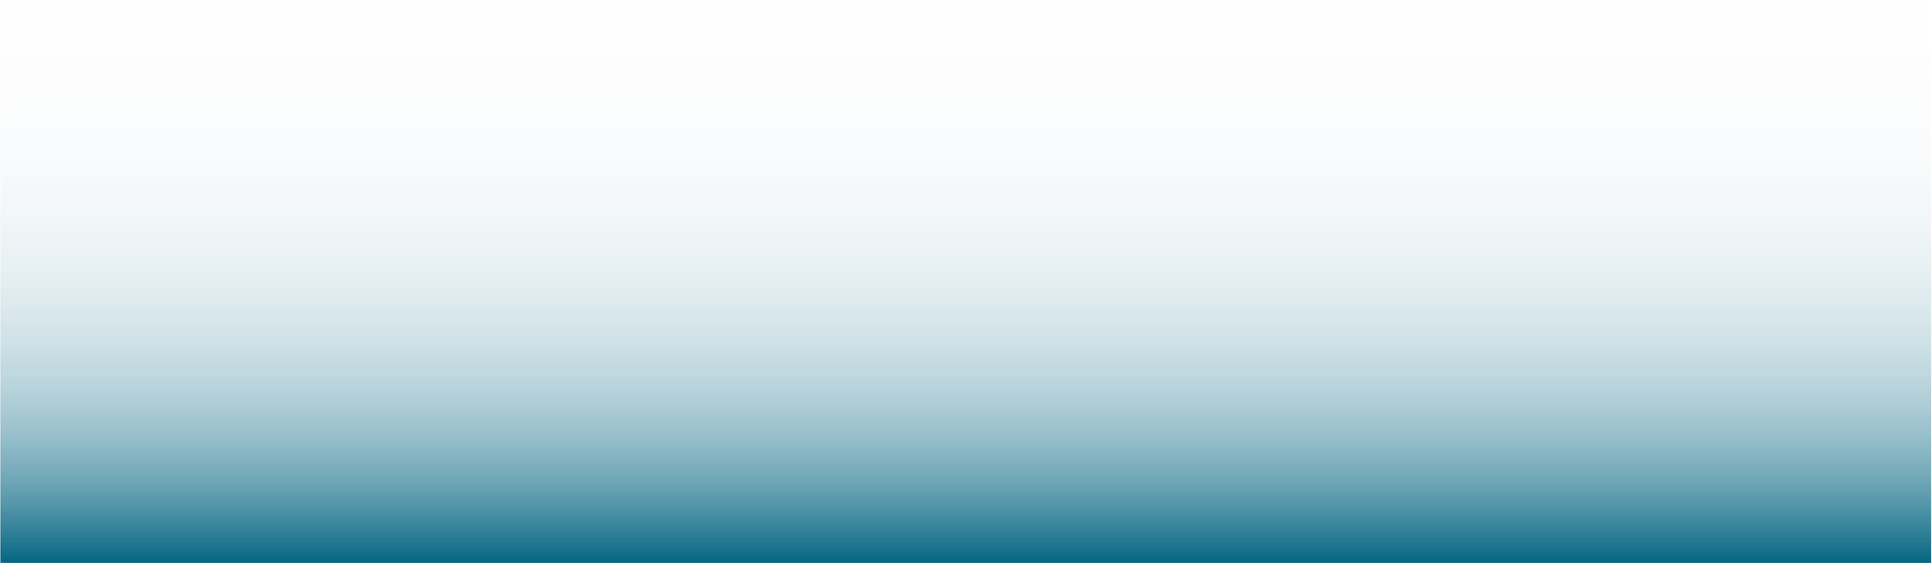 Blue Gradient That Fades To Transparency